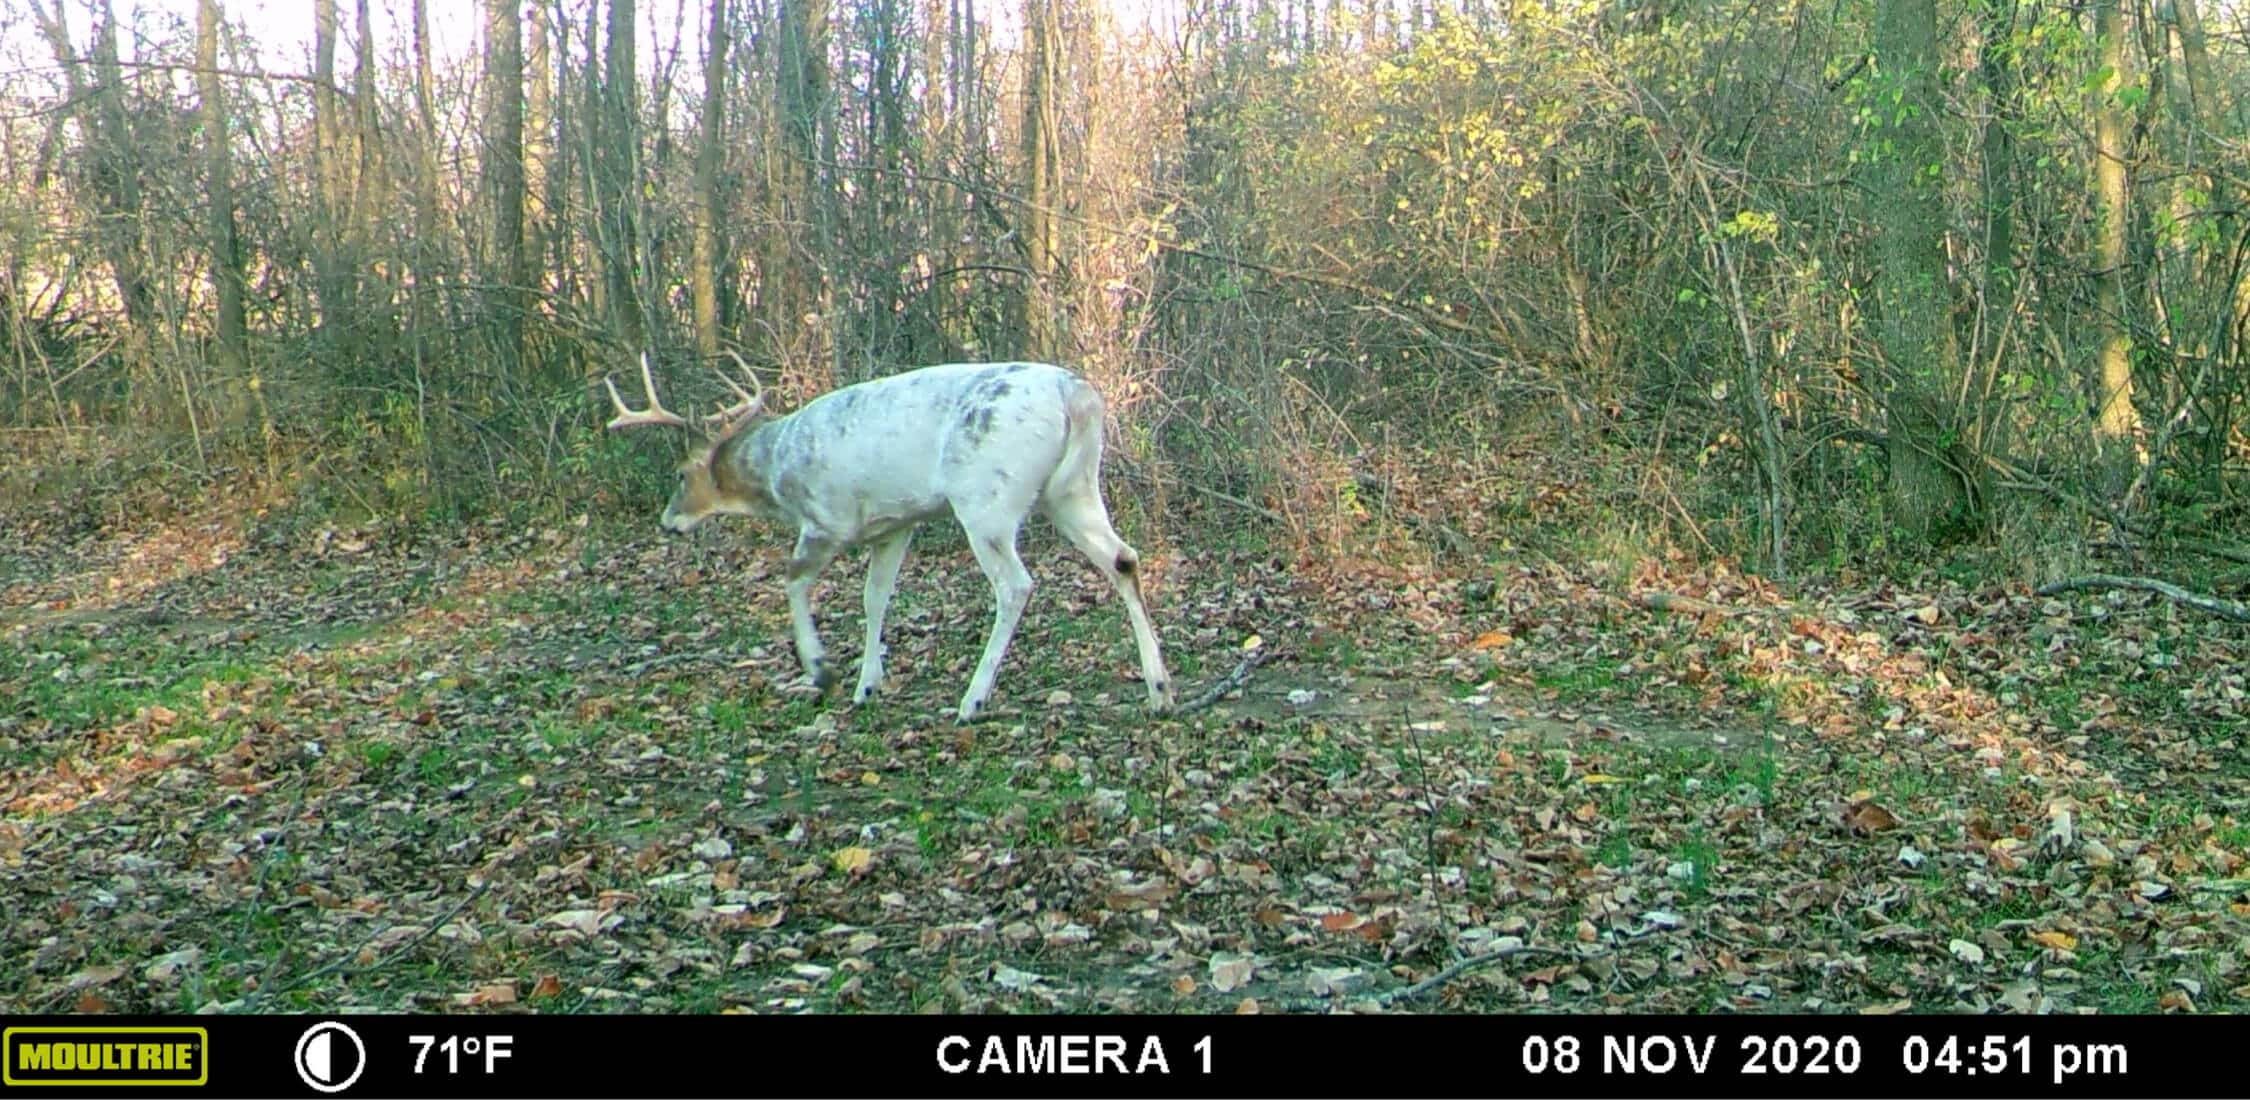 Image taken from Moultrie Mobile cellular trail camera